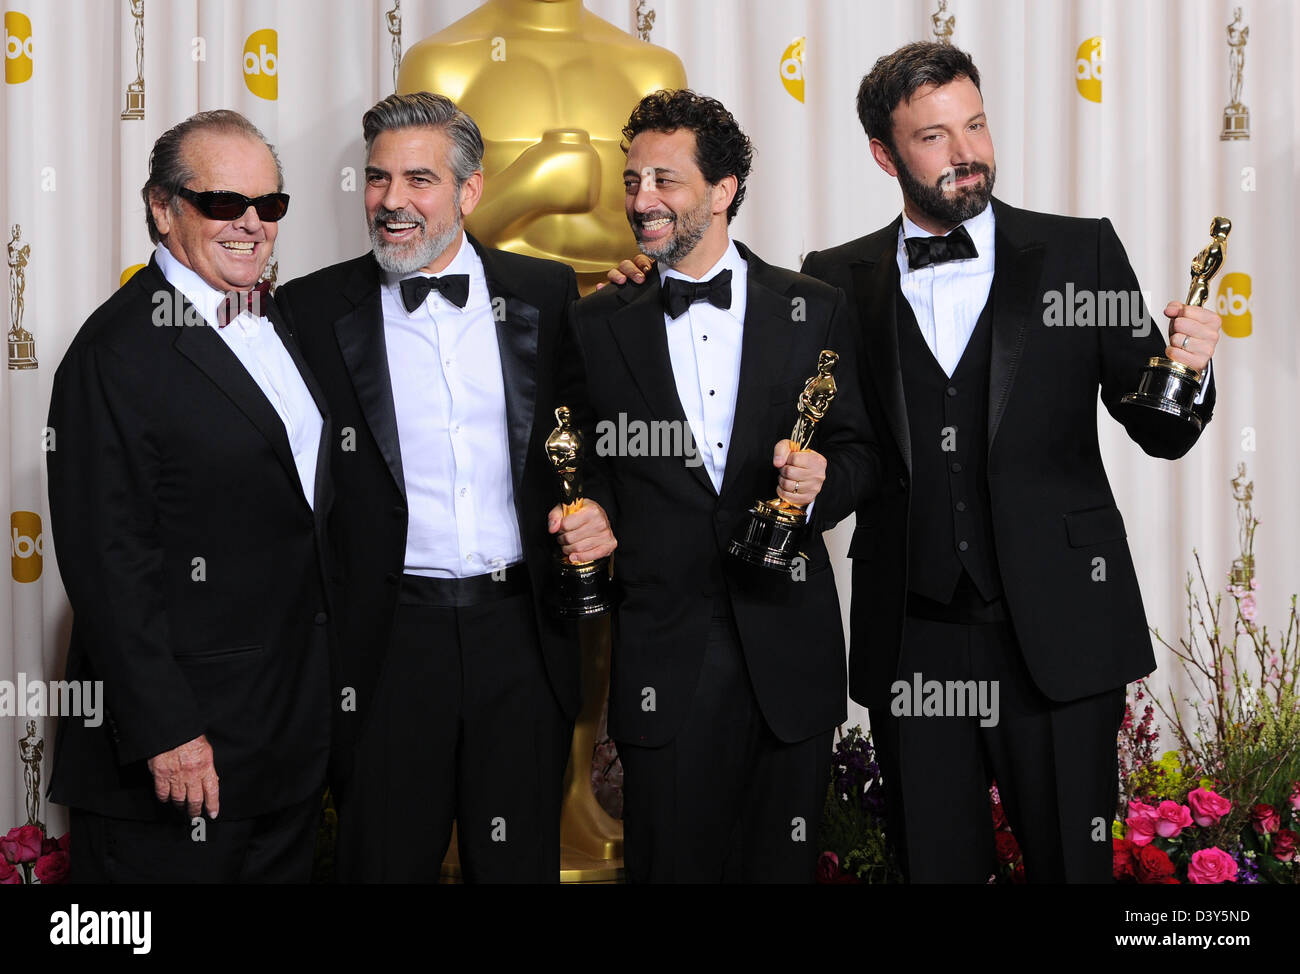 Los Angeles, USA. 24th February 2013. Jack Nicholson, George Clooney, Grant Heslov and Ben Affleck   in the winners press room at the 85th Annual Academy Awards Oscars, Los Angeles, America - 24 Feb 2013.  Credit:  Sydney Alford / Alamy Live News Stock Photo